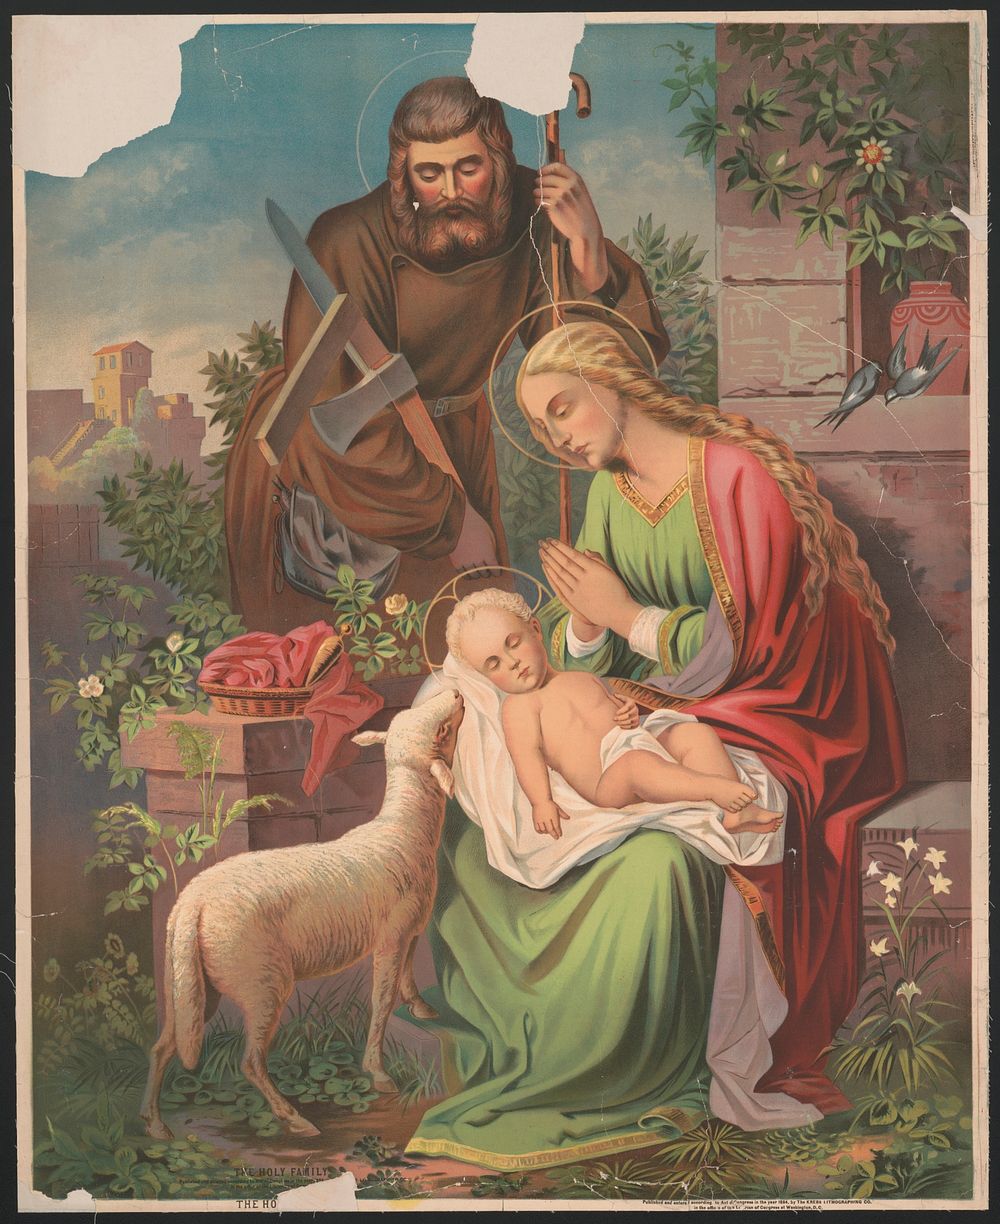 The holy family (1884). Original from the Library of Congress.